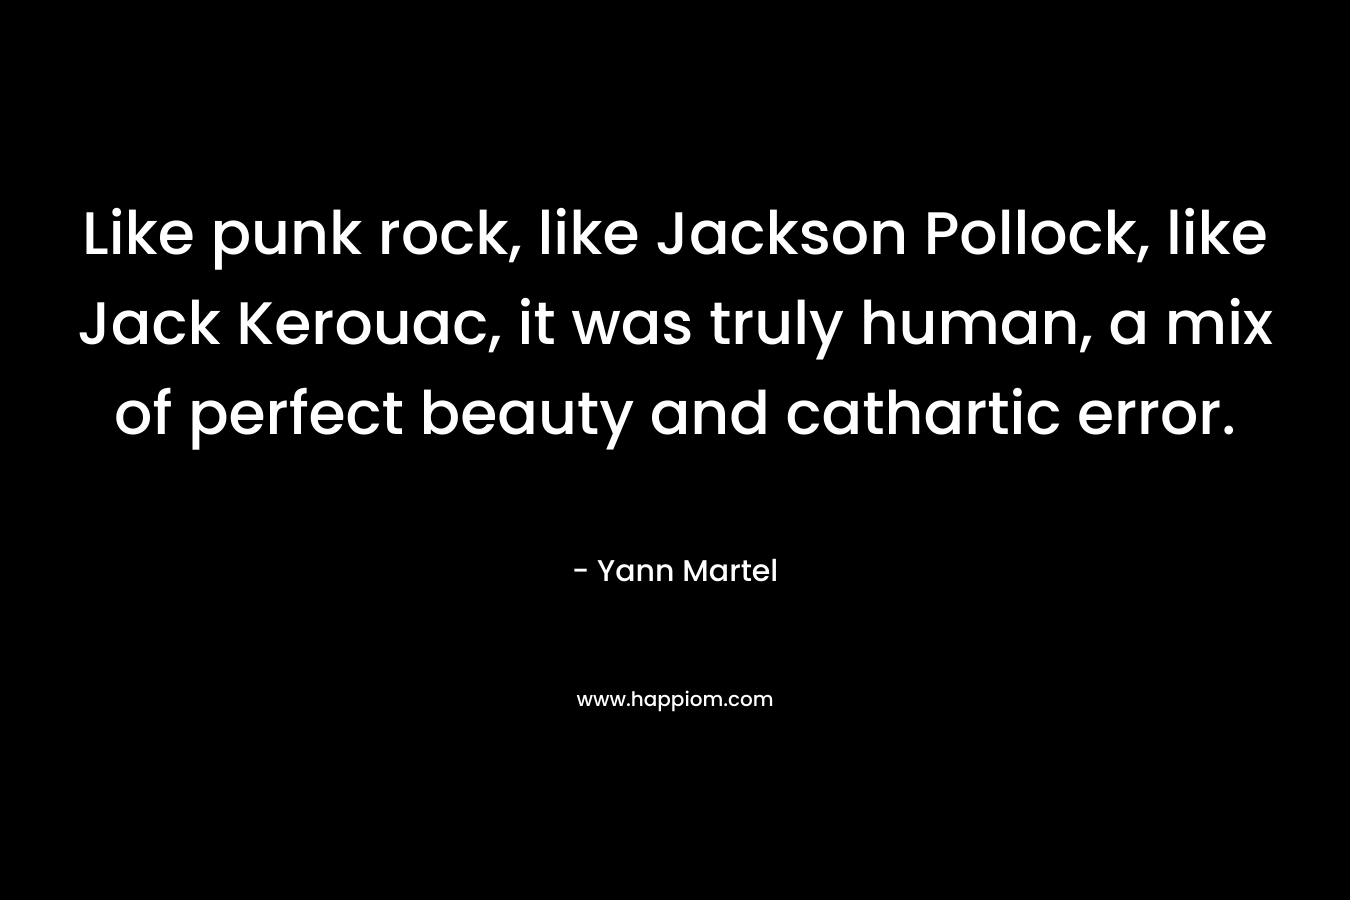 Like punk rock, like Jackson Pollock, like Jack Kerouac, it was truly human, a mix of perfect beauty and cathartic error.